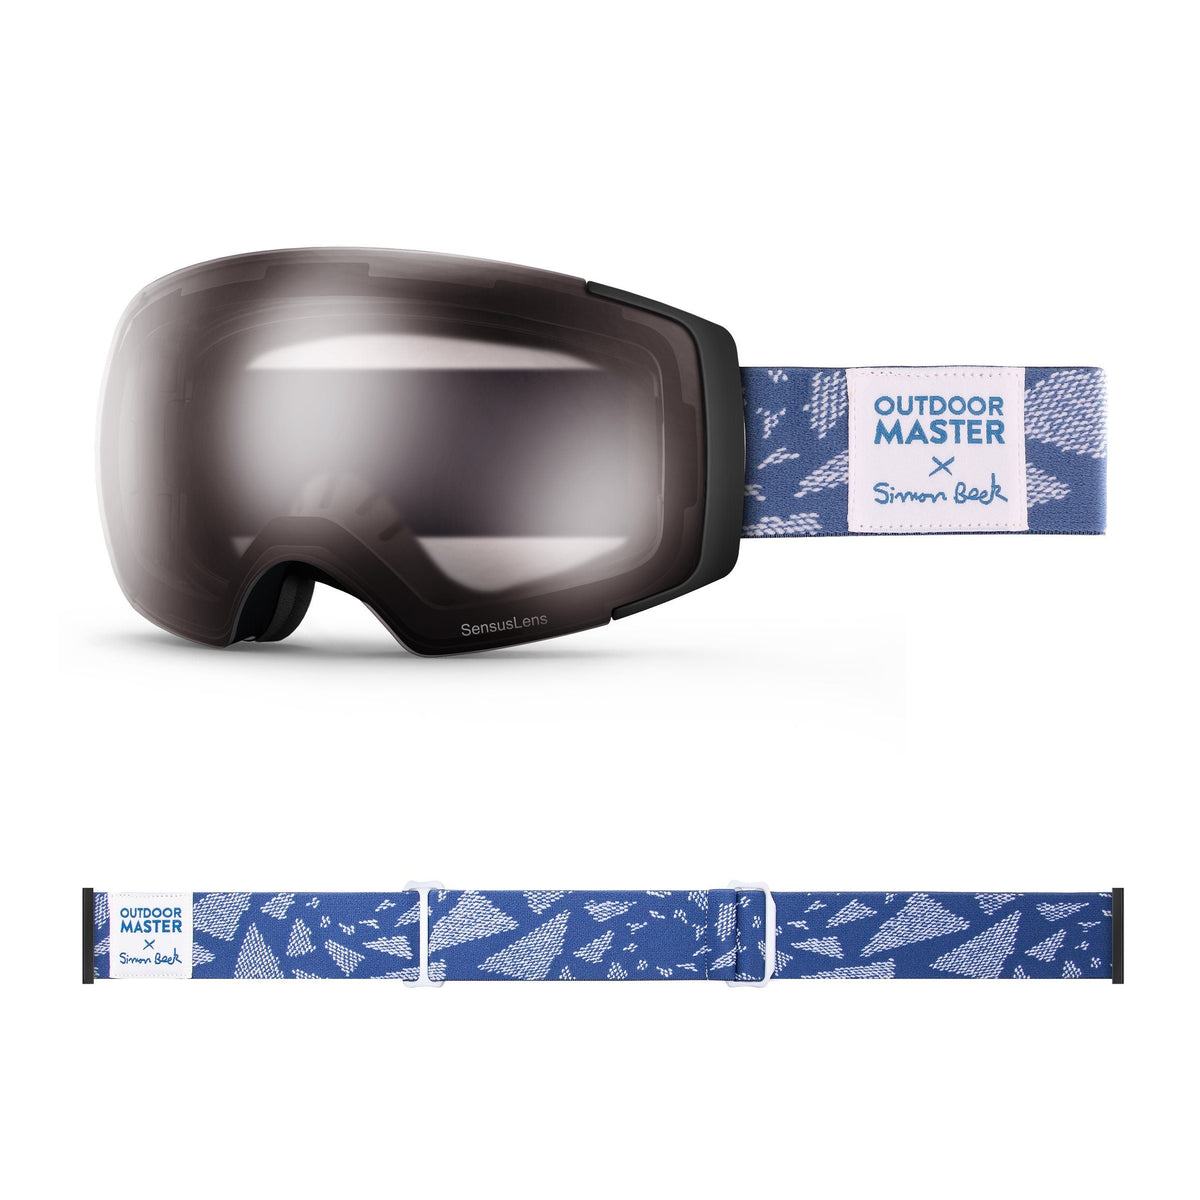 OutdoorMaster x Simon Beck Ski Goggles Pro Series - Snowshoeing Art Limited Edition OutdoorMaster SensusLens VLT40-80% Photochromatic Clear to Pink Flying Triangles